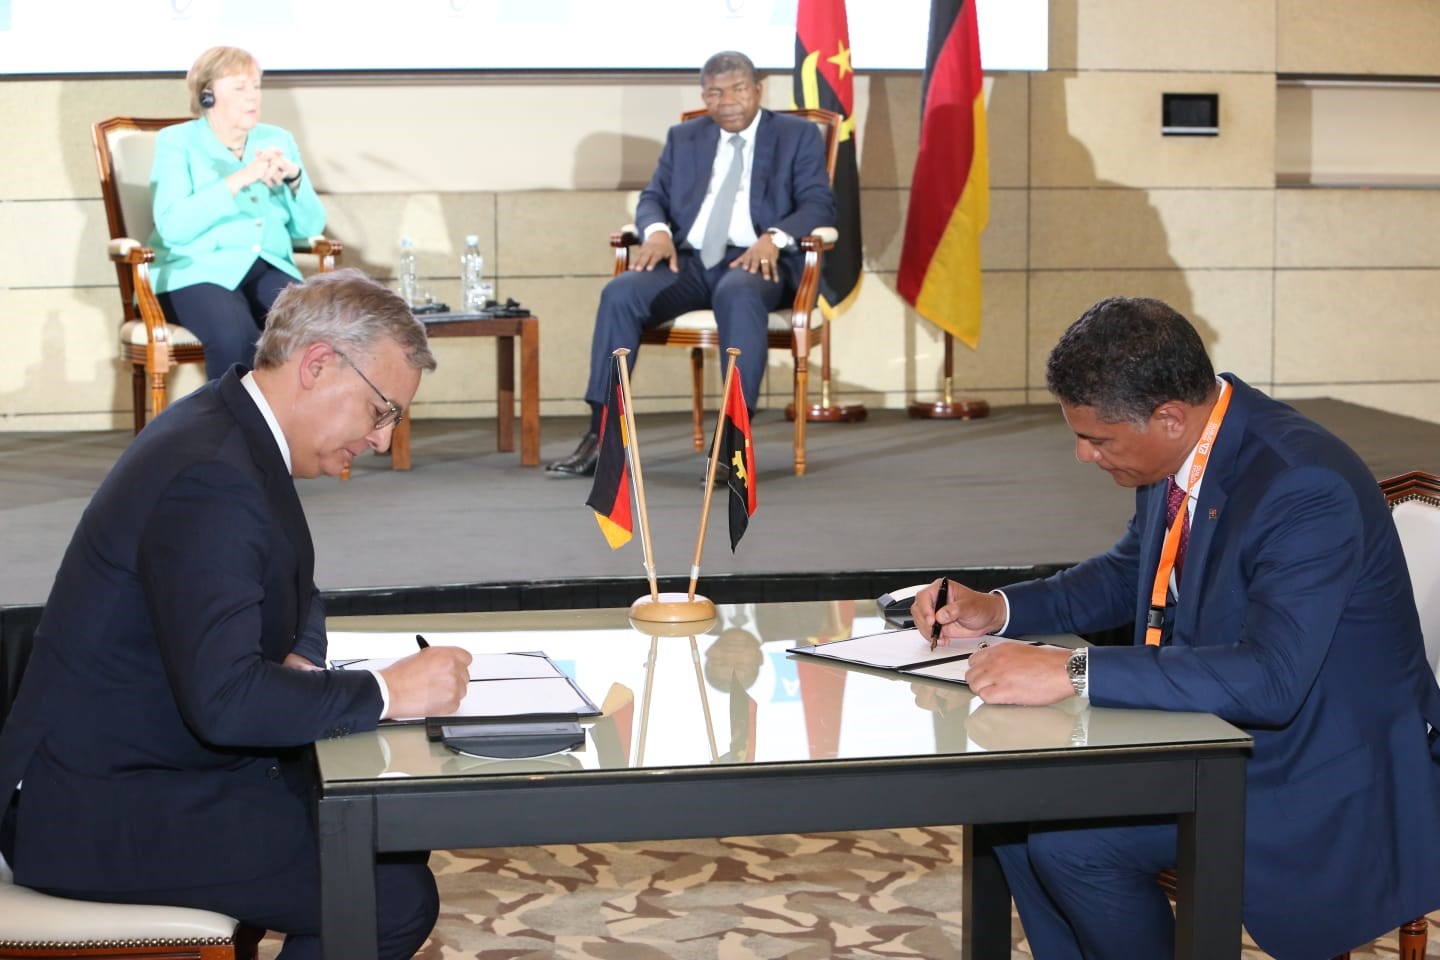 Dr. Toralf Haag signed the memorandum of understanding with the Angolan Minister for Energy and Water João Baptista Borges in the presence of Federal Chancellor Dr. Angela Merkel and the Angolan President João Manuel Gonçalves Lourenço